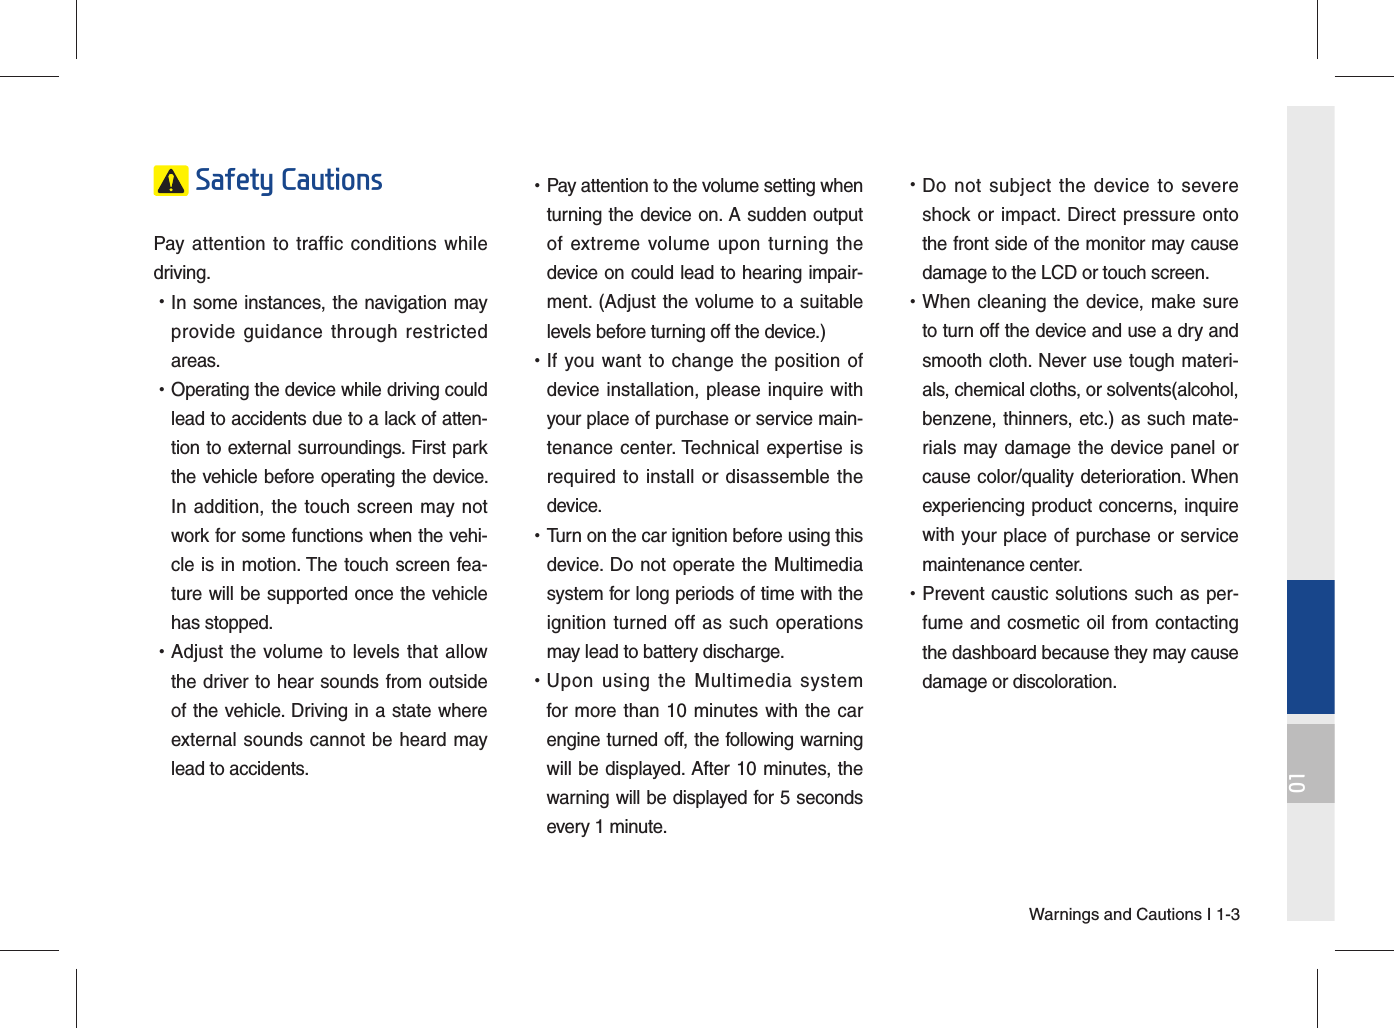 Warnings and Cautions I 1-301 Safety Cautions Pay attention to traffic conditions while driving.  •In some instances, the navigation mayprovide guidance through restrictedareas.  •Operating the device while driving couldlead to accidents due to a lack of atten-tion to external surroundings. First parkthe vehicle before operating the device.In addition, the touch screen may notwork for some functions when the vehi-cle is in motion. The touch screen fea-ture will be supported once the vehiclehas stopped. •Adjust the volume to levels that allowthe driver to hear sounds from outsideof the vehicle. Driving in a state whereexternal sounds cannot be heard maylead to accidents. •Pay attention to the volume setting whenturning the device on. A sudden outputof extreme volume upon turning thedevice on could lead to hearing impair-ment. (Adjust the volume to a suitablelevels before turning off the device.) •If you want to change the position ofdevice installation, please inquire withyour place of purchase or service main-tenance center. Technical expertise isrequired to install or disassemble thedevice. •Turn on the car ignition before using thisdevice. Do not operate the Multimediasystem for long periods of time with theignition turned off as such operationsmay lead to battery discharge. •Upon using the Multimedia systemfor more than 10 minutes with the carengine turned off, the following warningwill be displayed. After 10 minutes, thewarning will be displayed for 5 secondsevery 1 minute. •Do not subject the device to severeshock or impact. Direct pressure ontothe front side of the monitor may causedamage to the LCD or touch screen. •When cleaning the device, make sureto turn off the device and use a dry andsmooth cloth. Never use tough materi-als, chemical cloths, or solvents(alcohol,benzene, thinners, etc.) as such mate-rials may damage the device panel orcause color/quality deterioration. Whenexperiencing product concerns, inquirewith your place of purchase or servicemaintenance center. •Prevent caustic solutions such as per-fume and cosmetic oil from contactingthe dashboard because they may causedamage or discoloration.